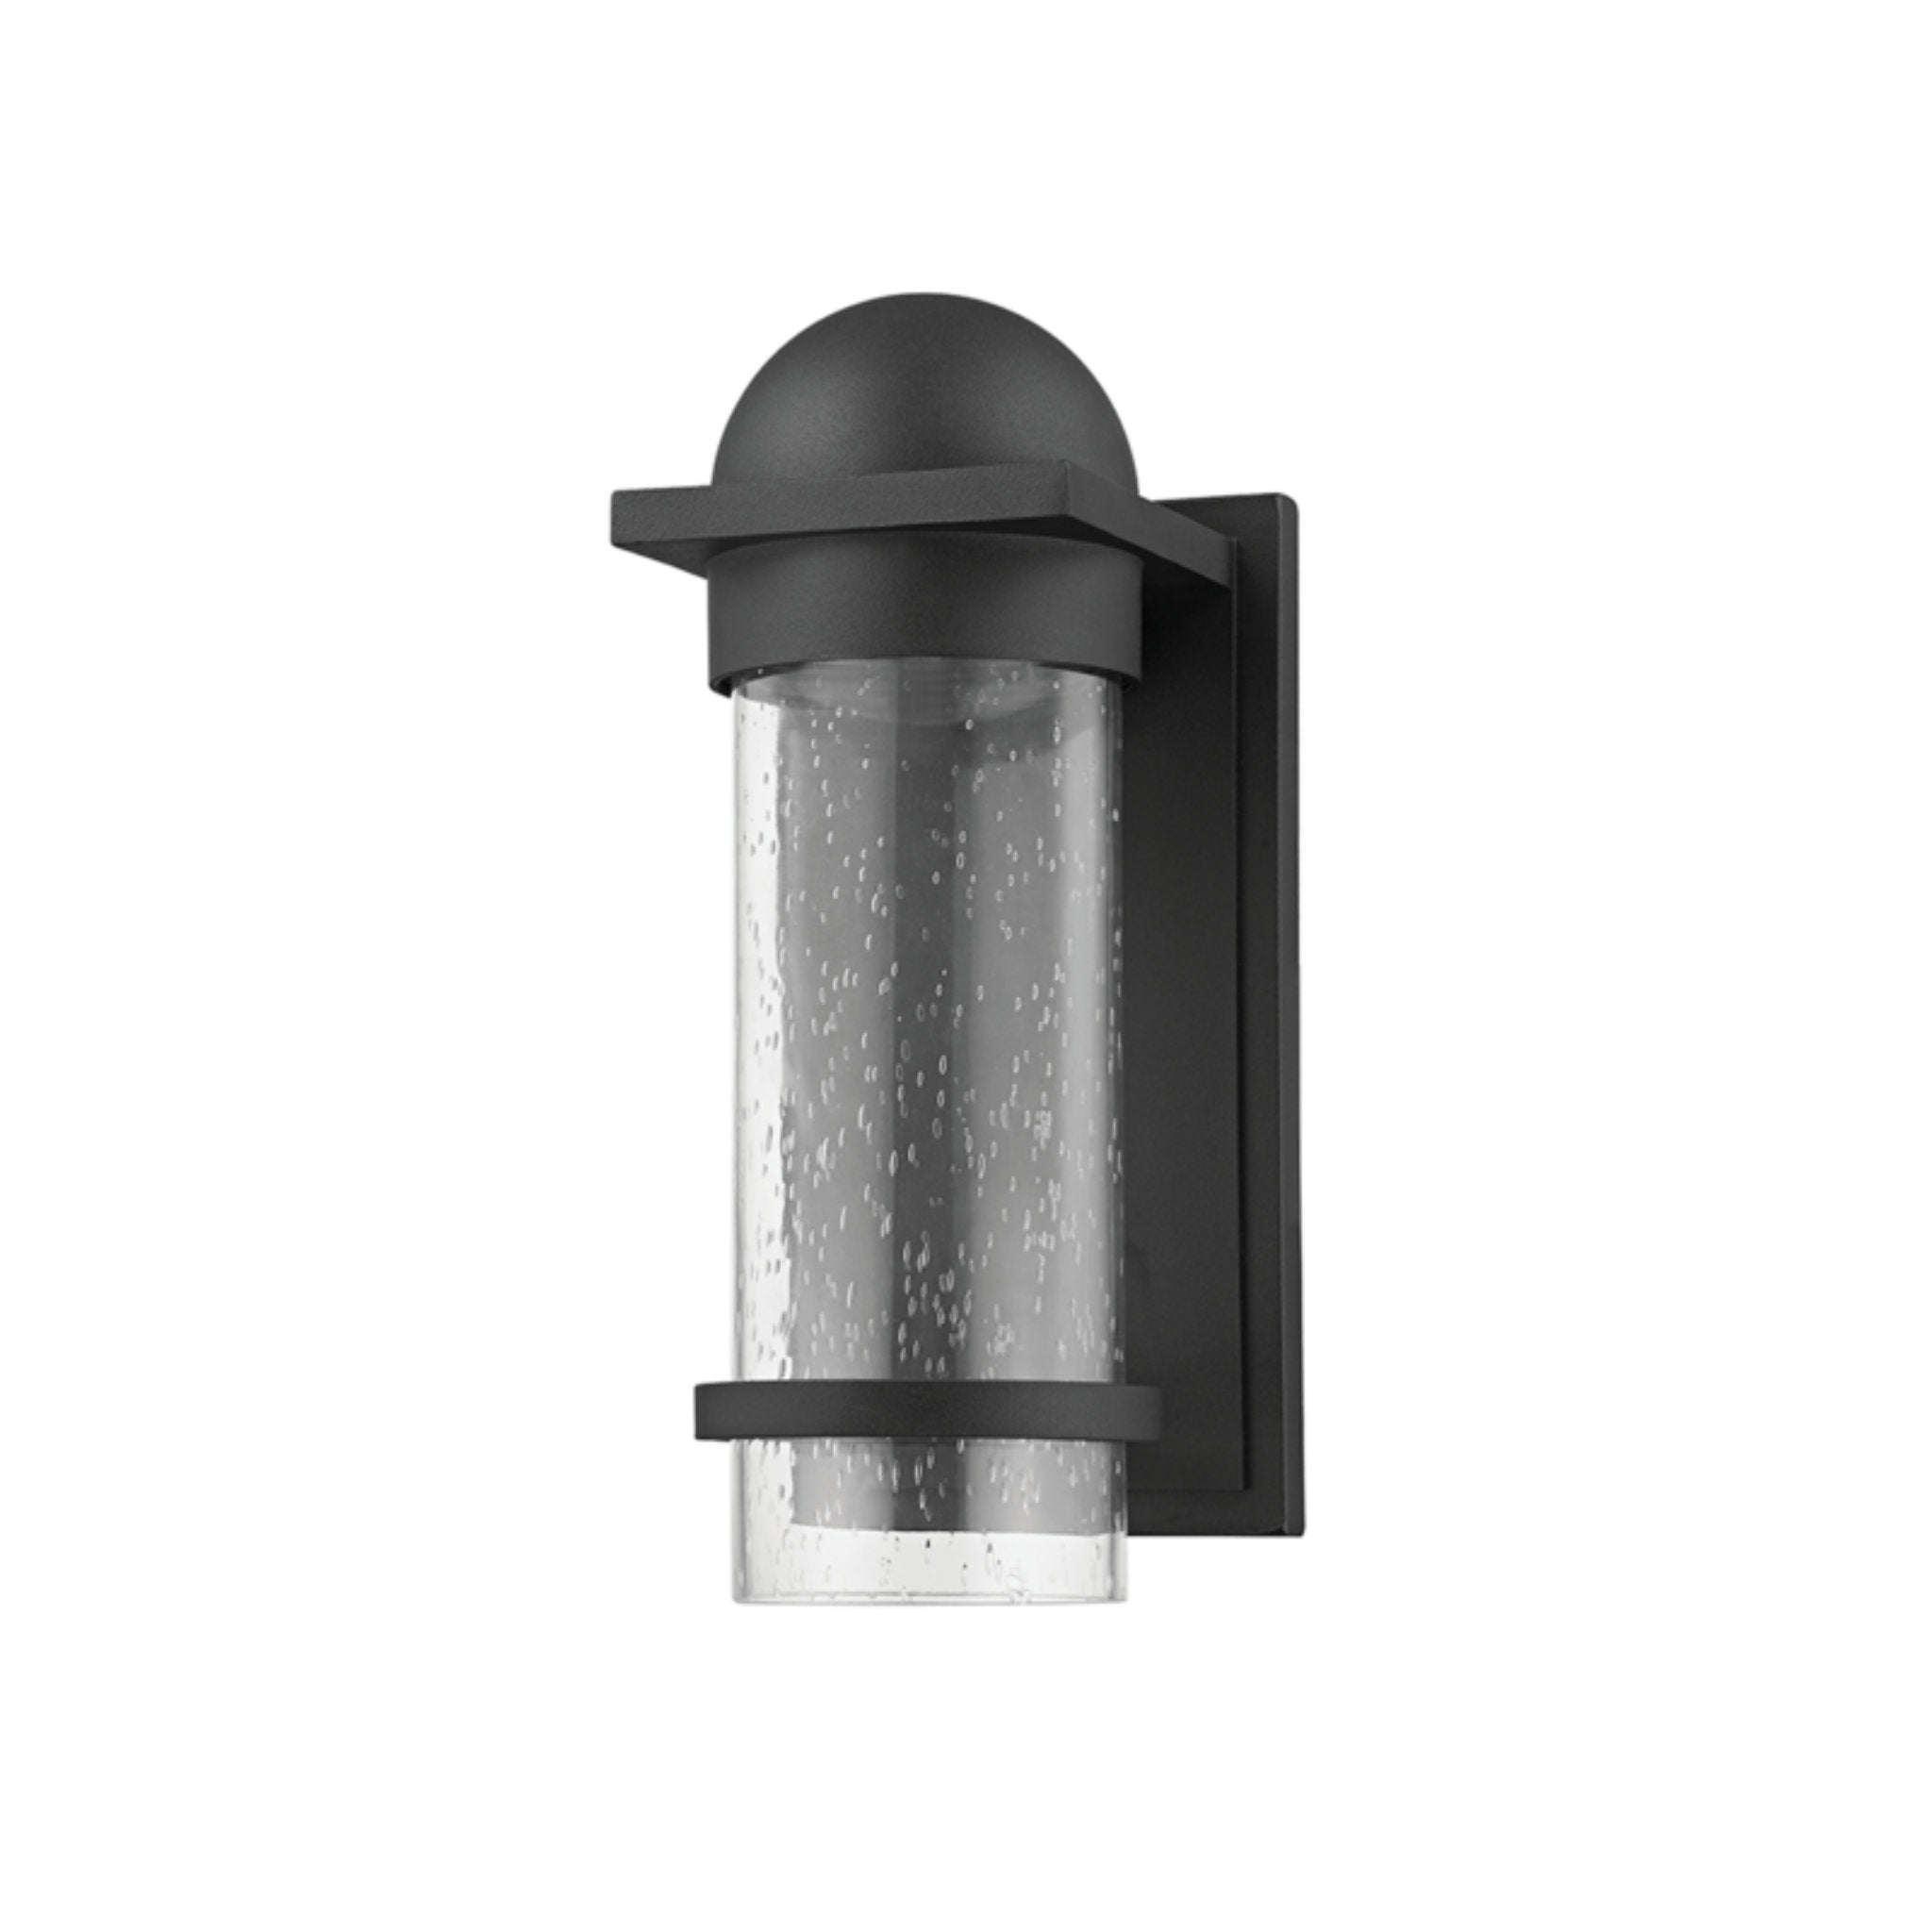 Nero 1 Light Wall Sconce in Textured Black